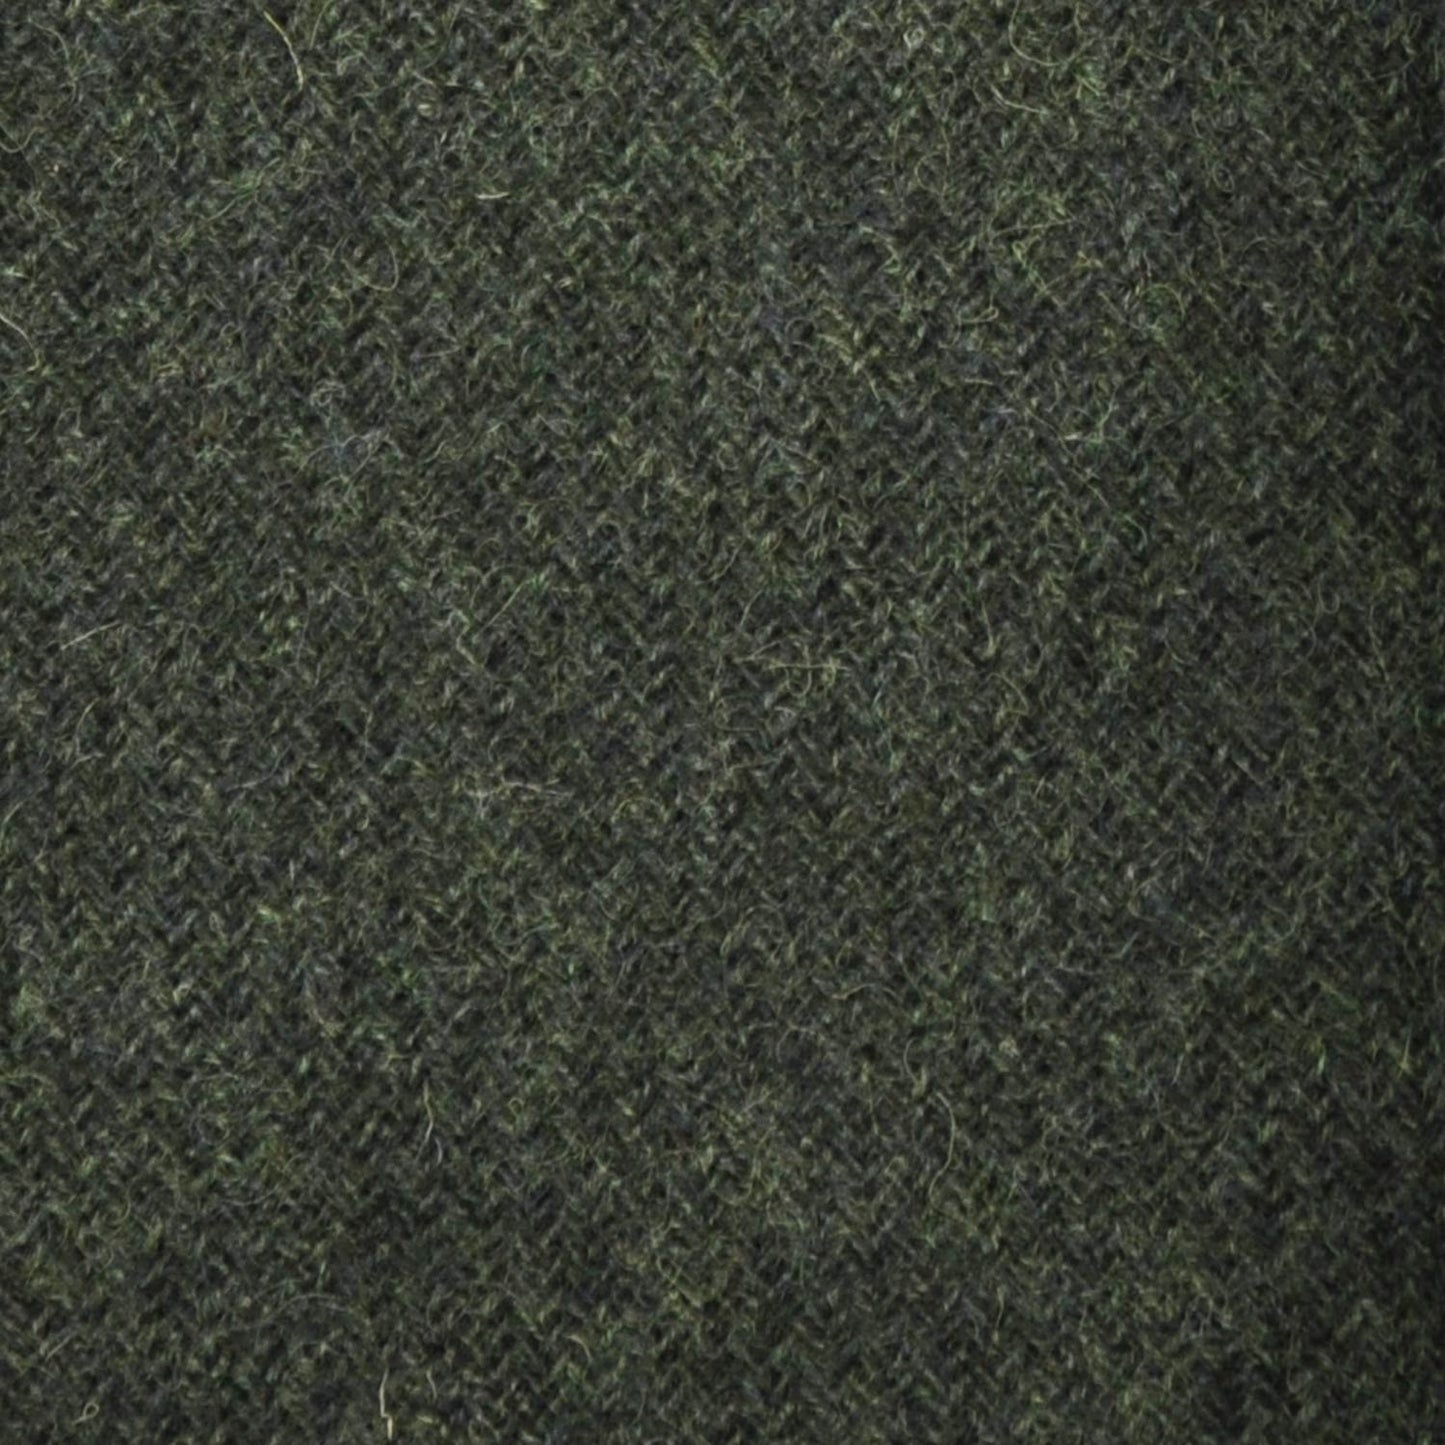 Load image into Gallery viewer, F.Marino Tweed Tie 3 Folds Bottle Green-Wools Boutique Uomo
